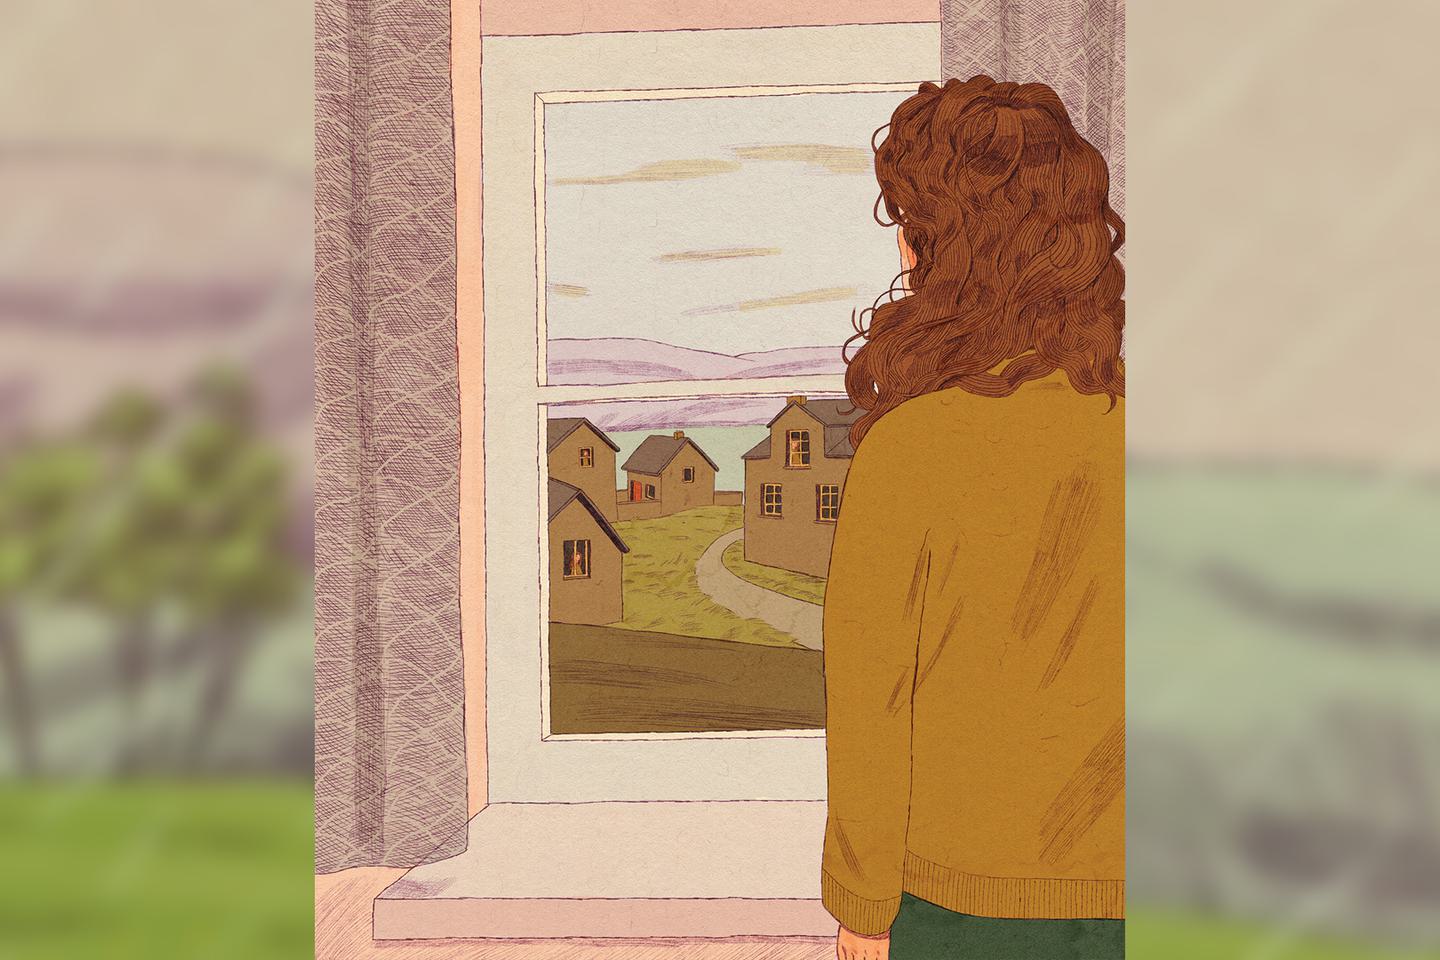 Illustration of a woman looking out a window.